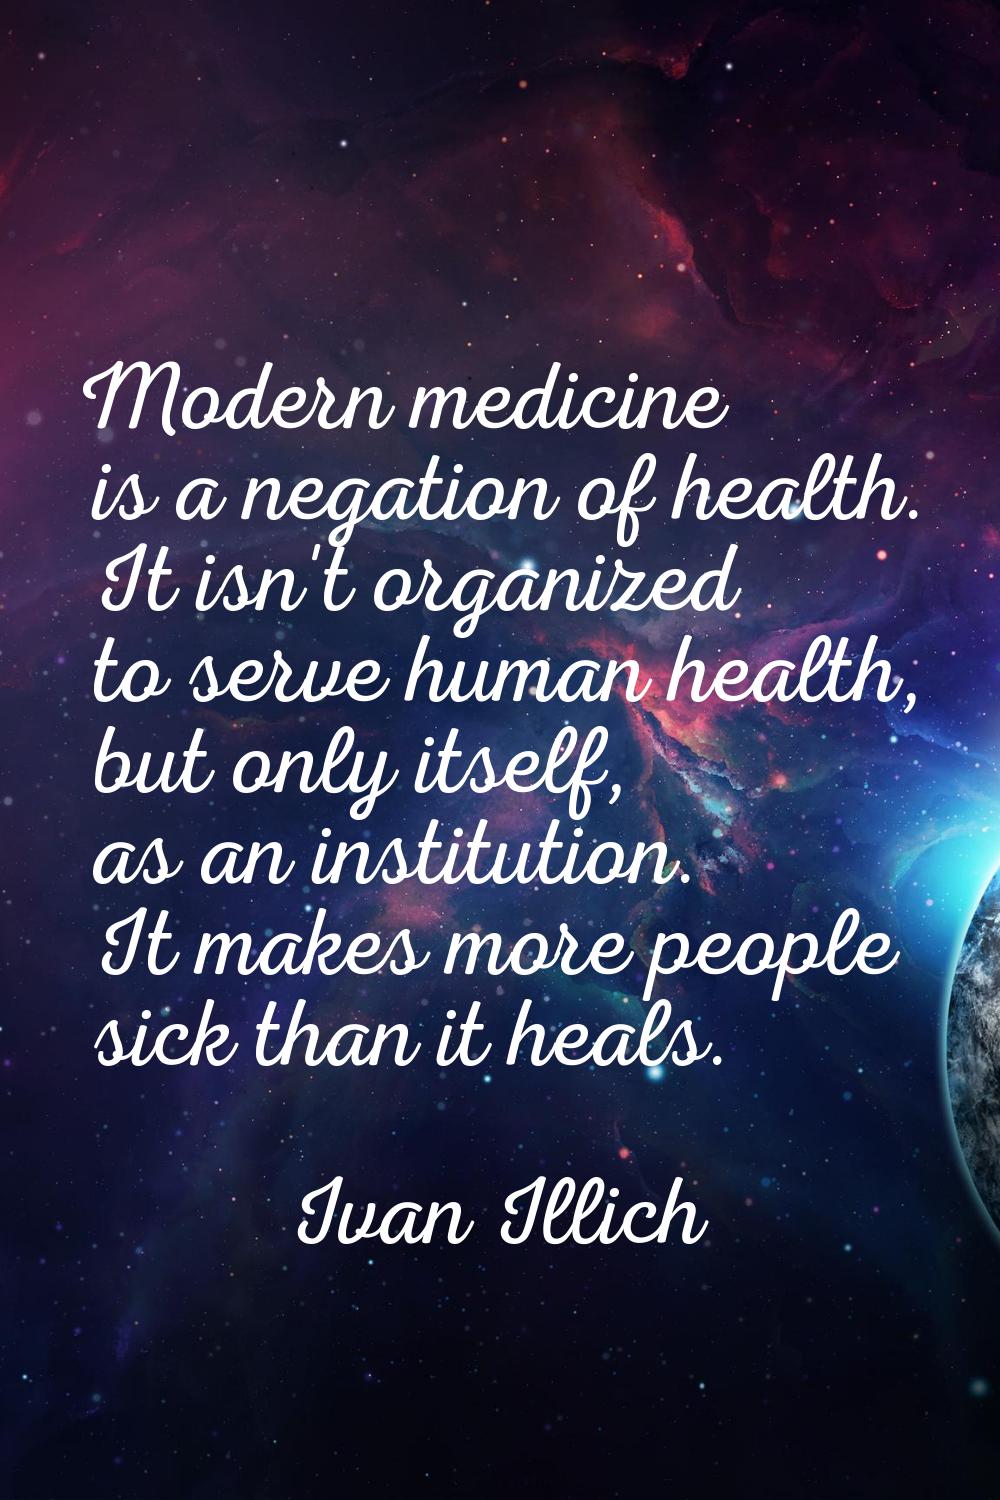 Modern medicine is a negation of health. It isn't organized to serve human health, but only itself,